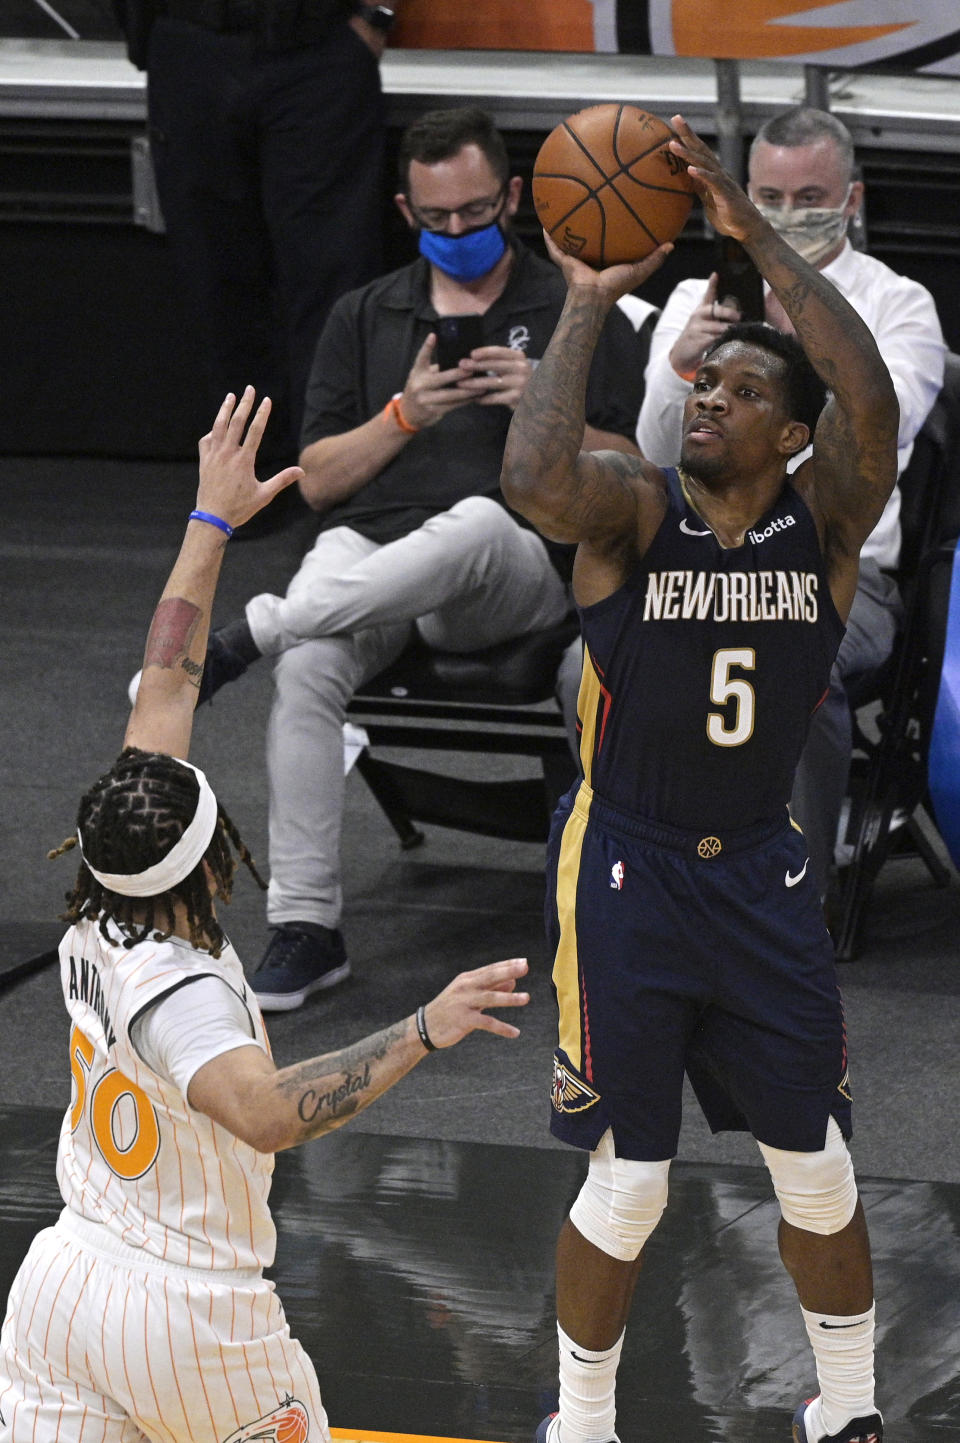 New Orleans Pelicans guard Eric Bledsoe (5) goes up for a shot in front of Orlando Magic guard Cole Anthony (50) during the second half of an NBA basketball game Thursday, April 22, 2021, in Orlando, Fla. (AP Photo/Phelan M. Ebenhack)